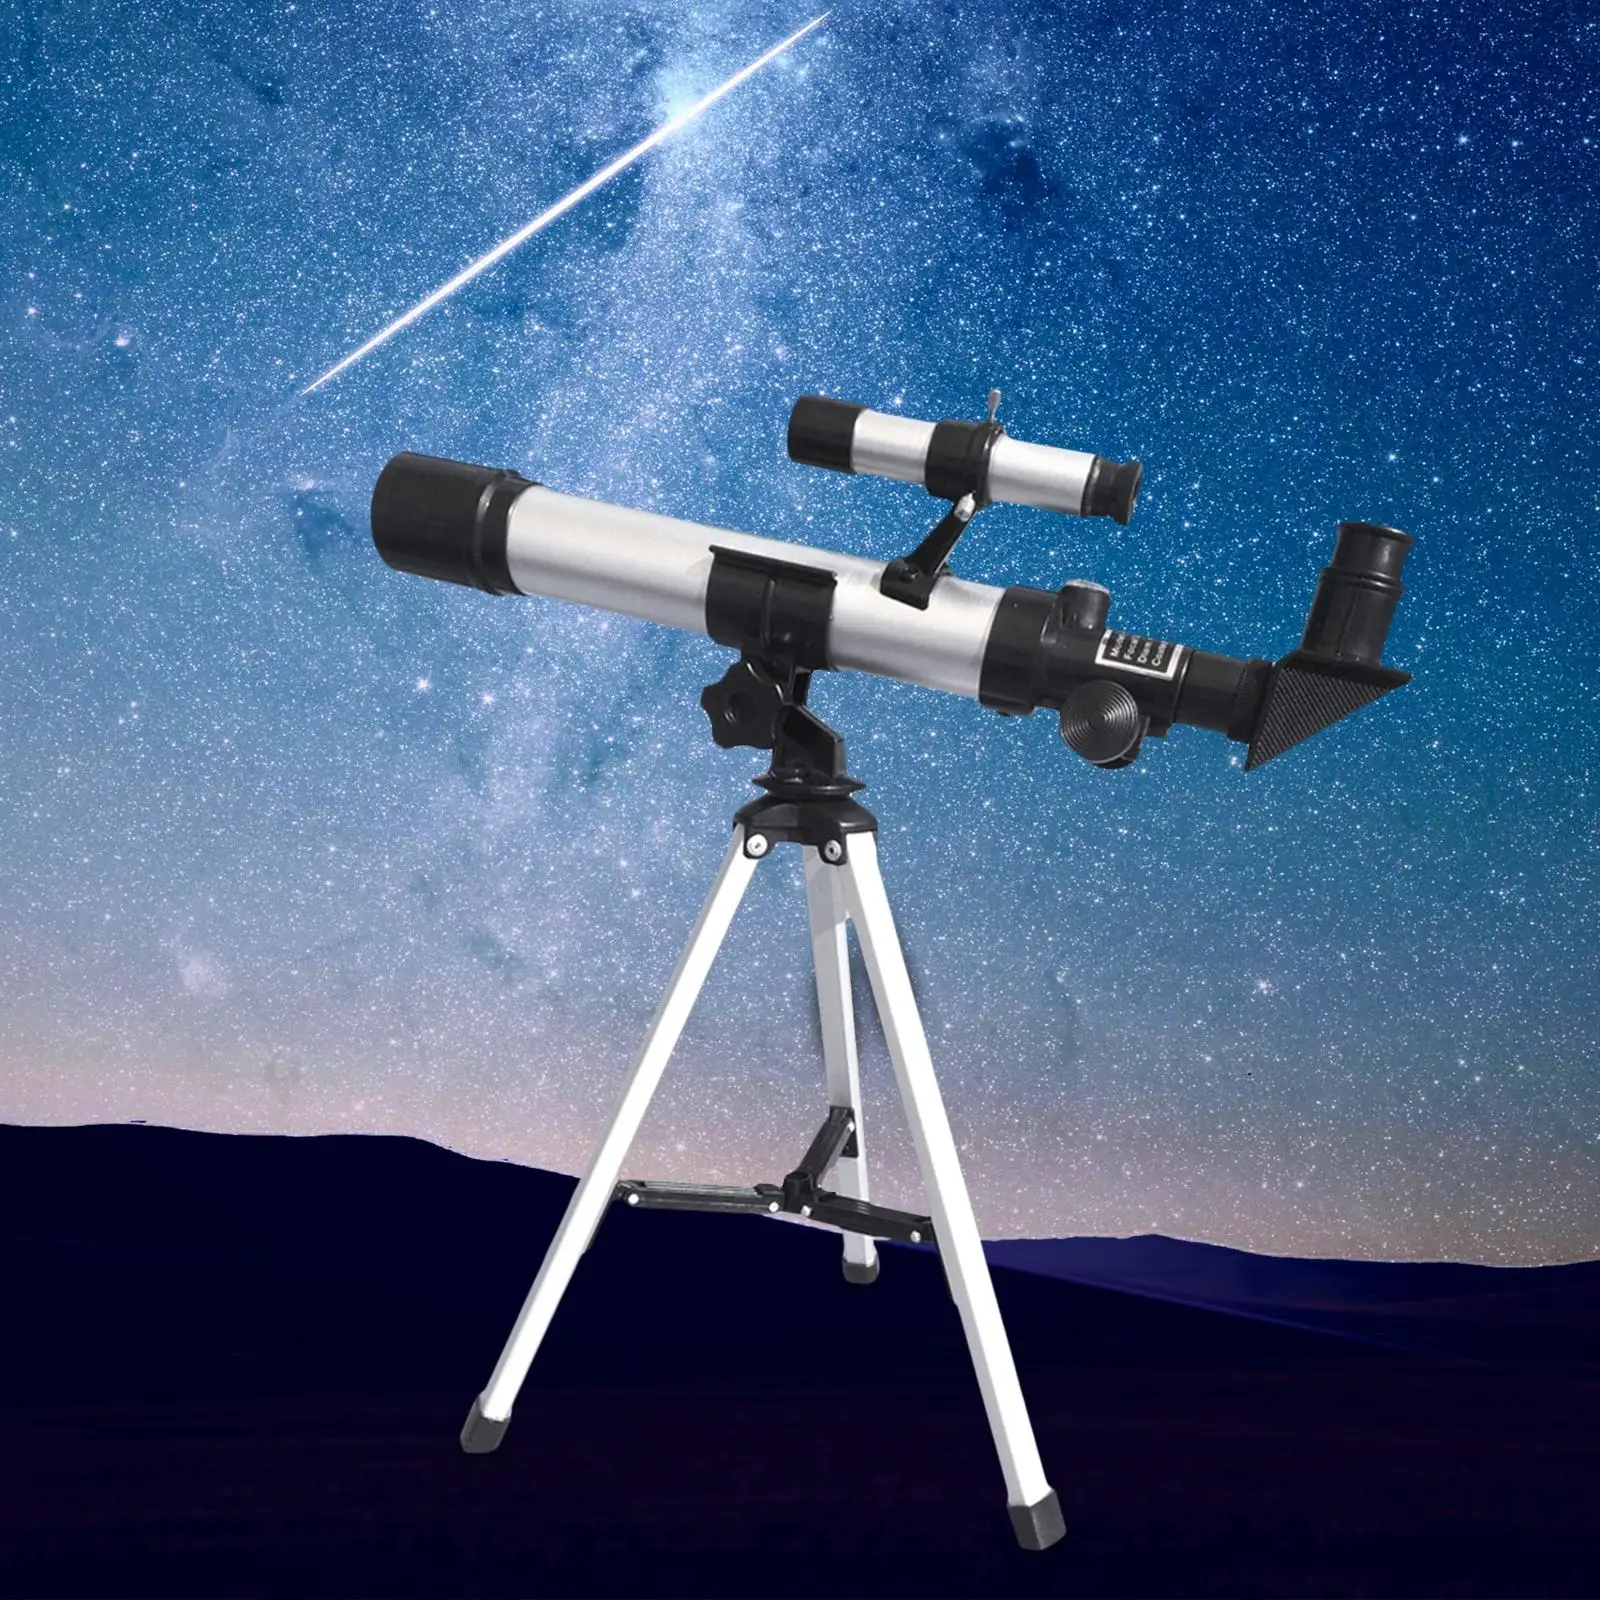 Professional Kids Astronomical Telescope with Tripod 1.5 40mm Objective Lens Refractor Telescope for Beginners Educational Toys